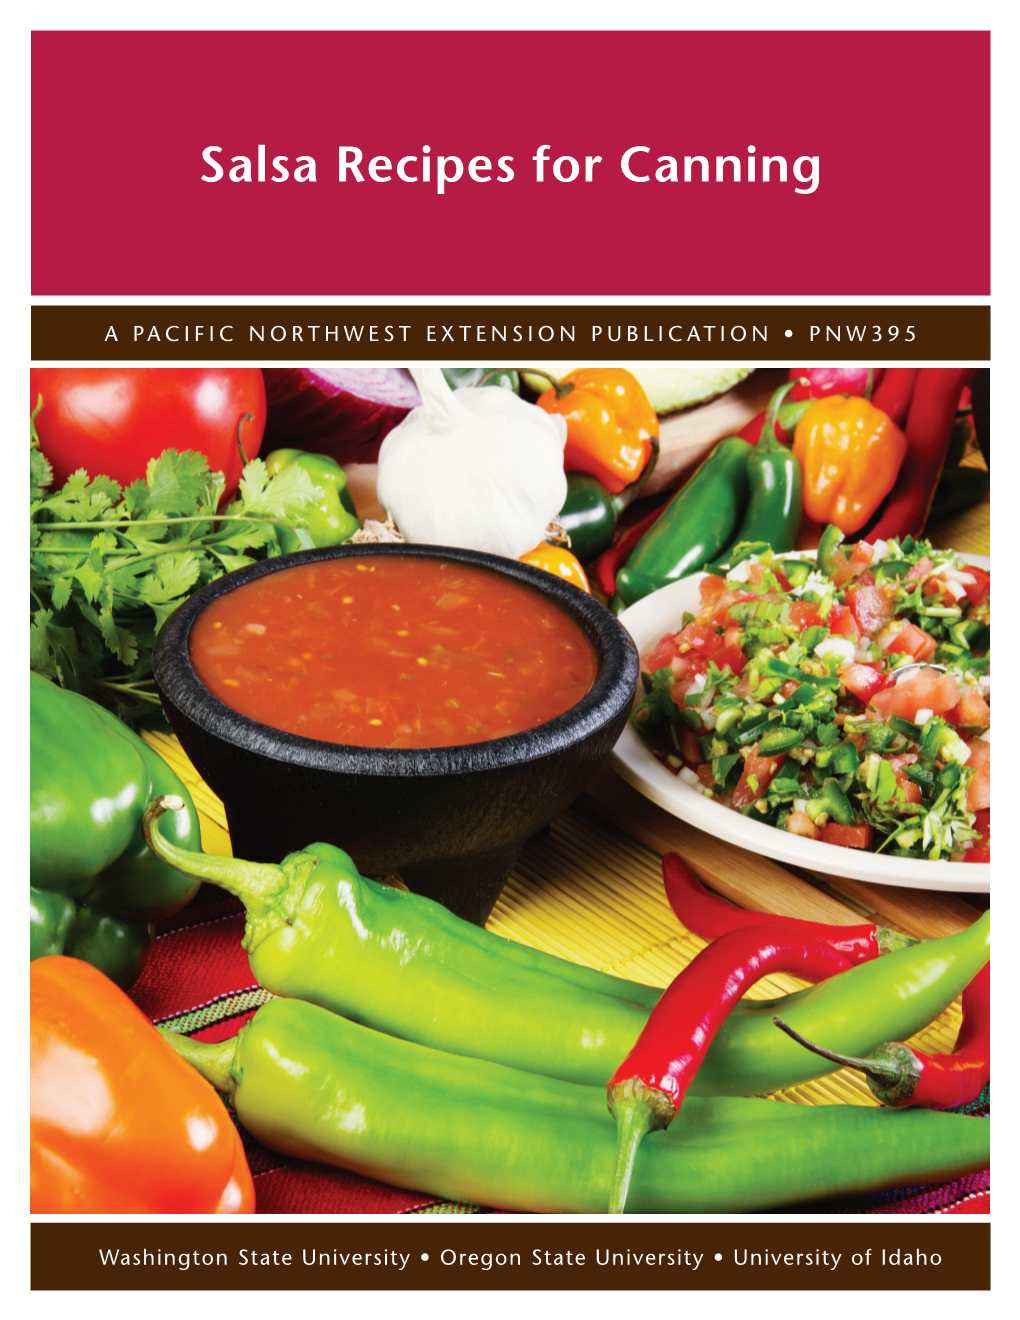 Salsa Recipes for Canning